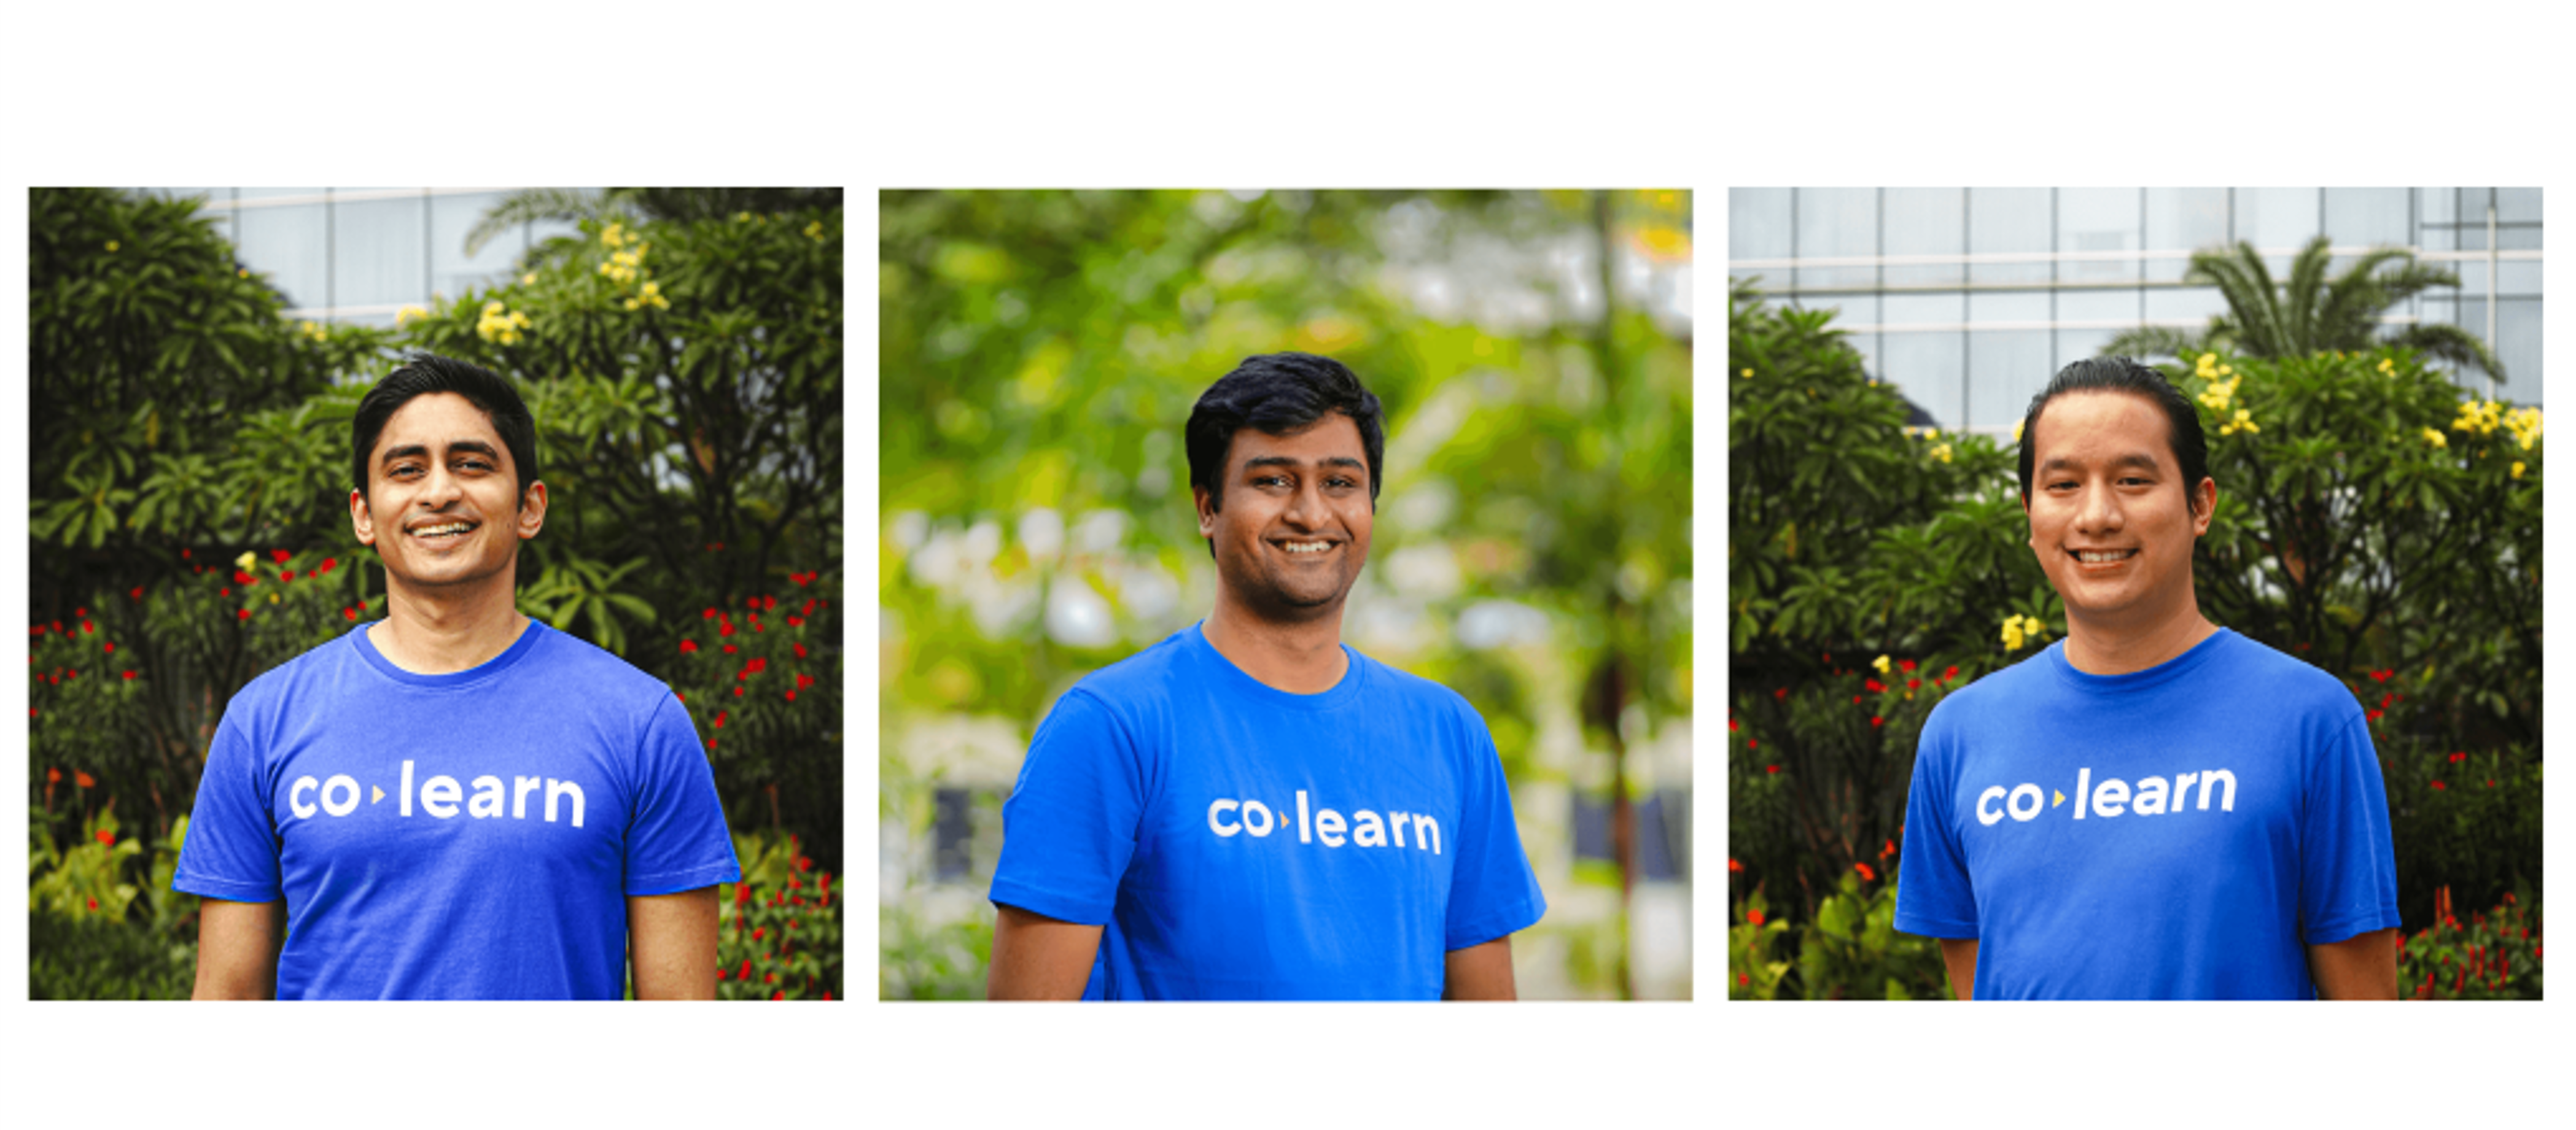 Indonesian EdTech company CoLearn raises an additional US$17 million in Series A follow-on funding led by TNB Aura, KTB Network and BINUS GROUP banner images